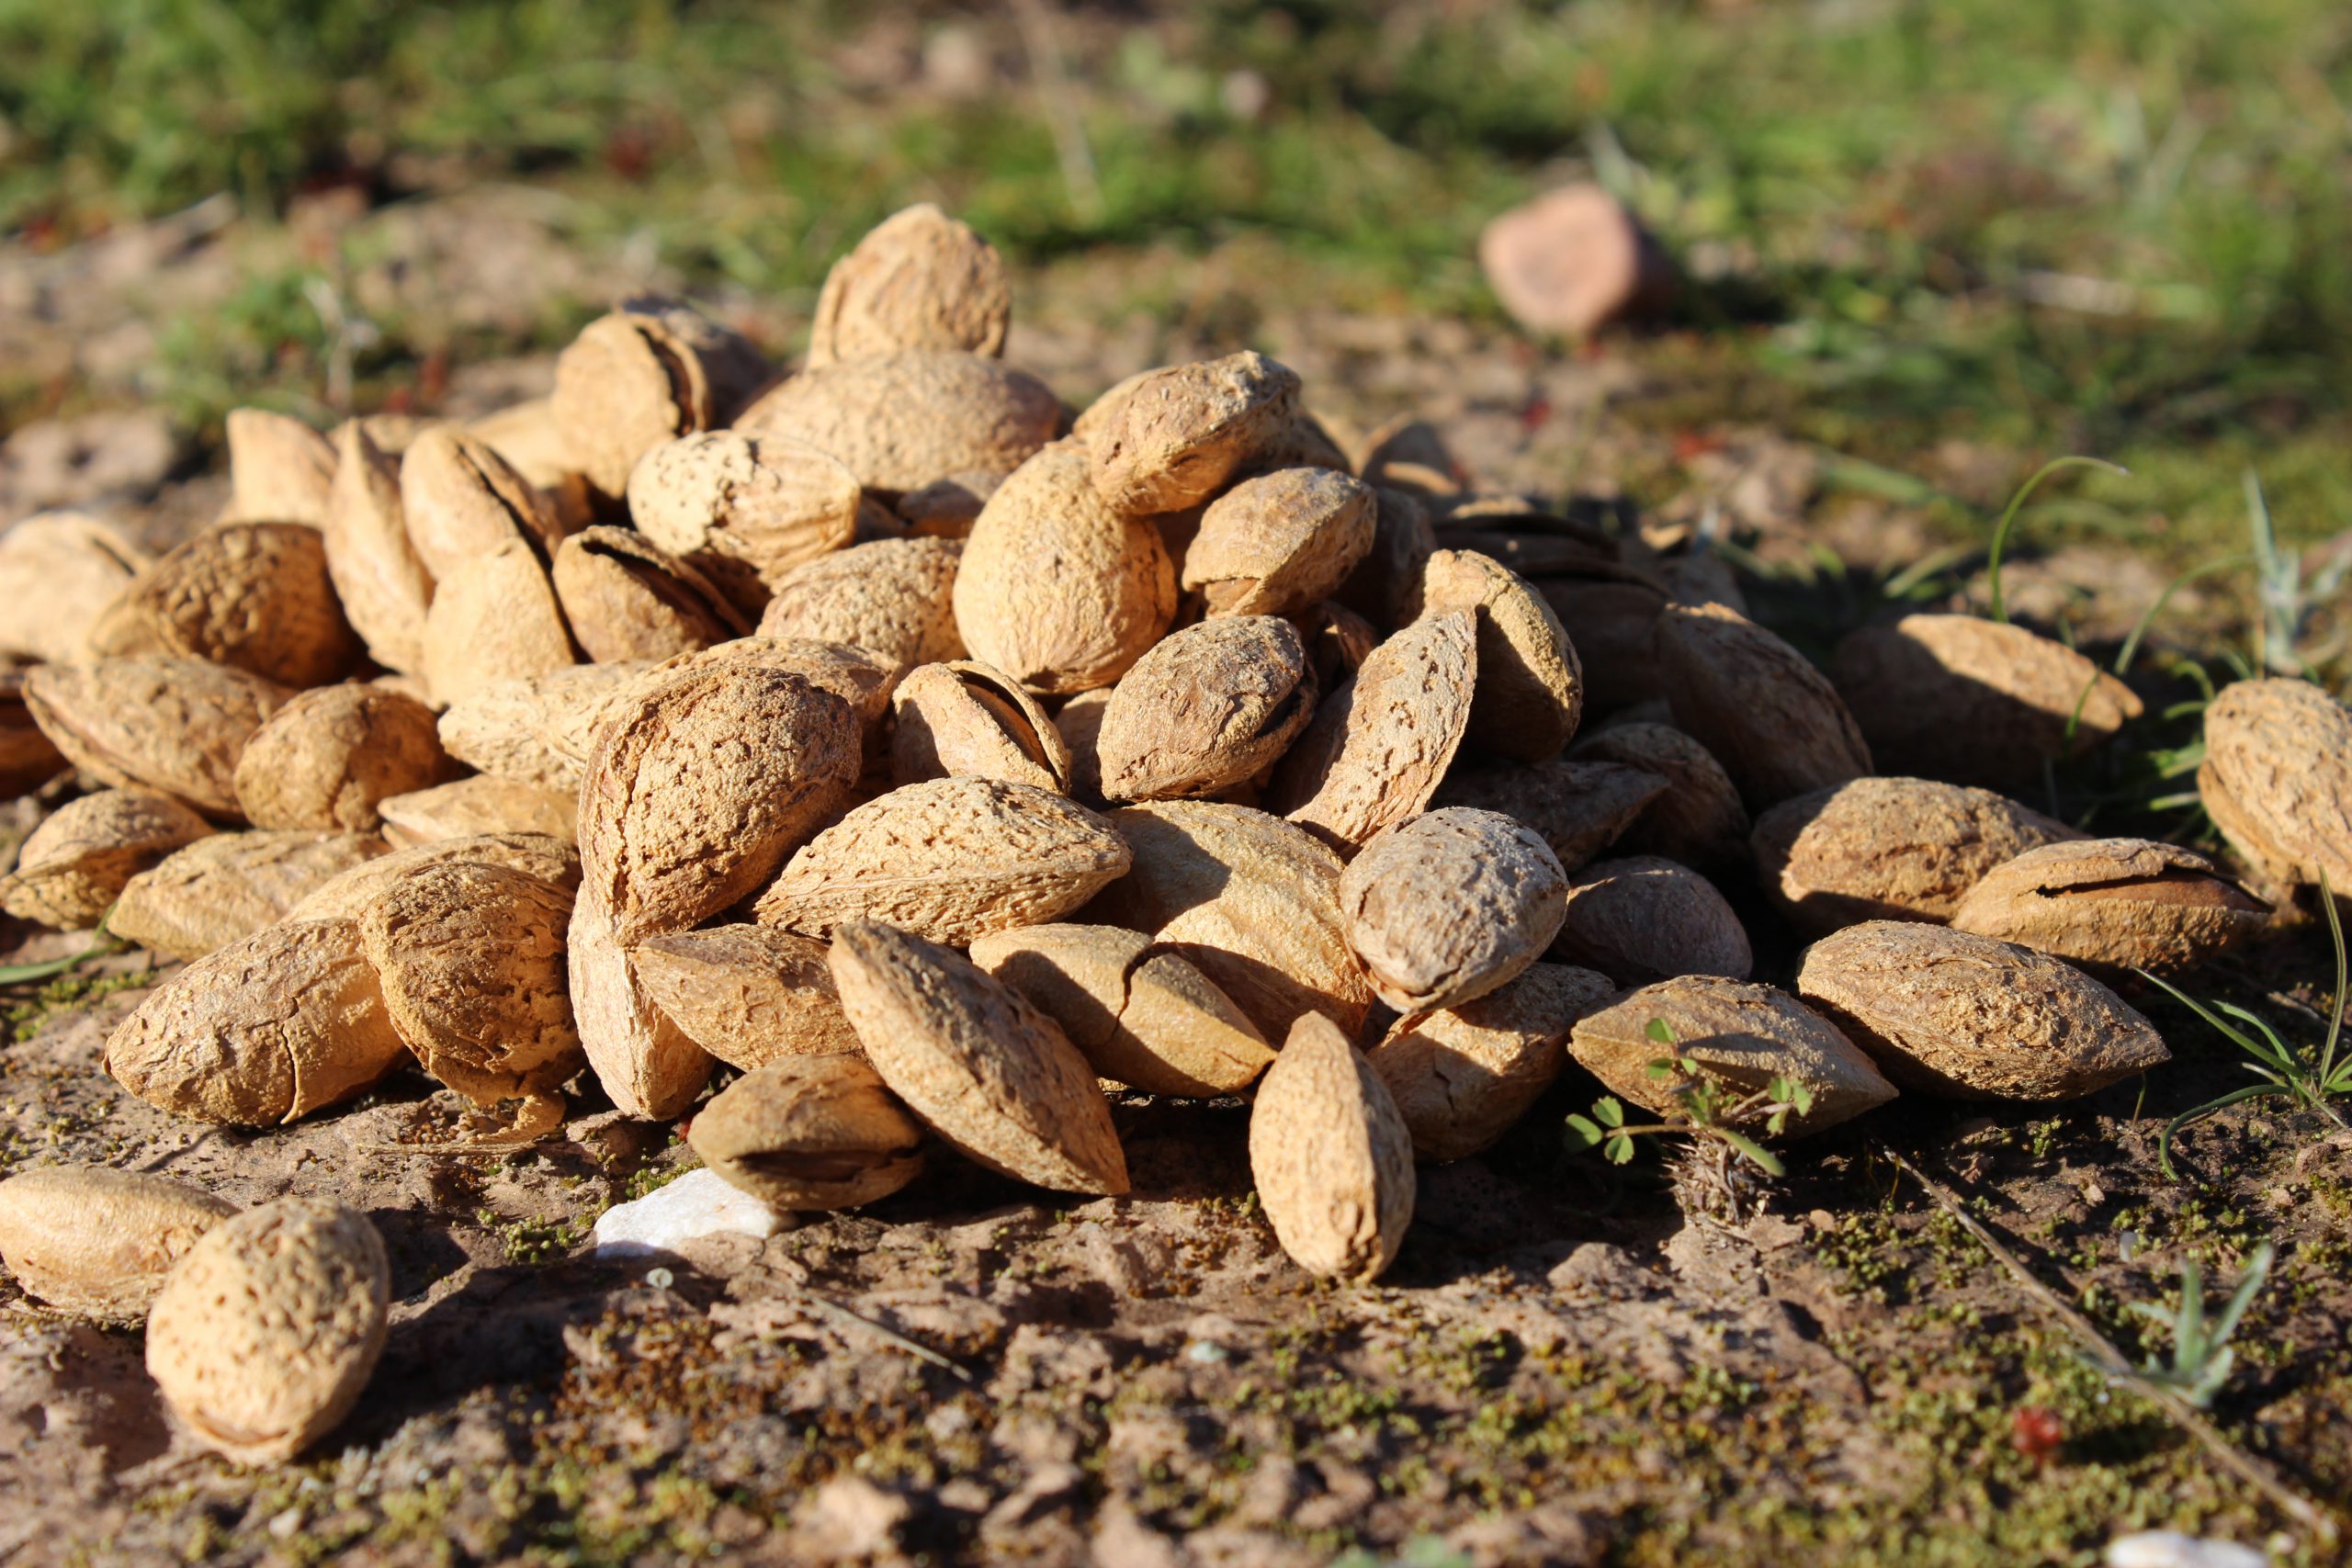 Iranian Almond Market | Wholesale for Export & Import